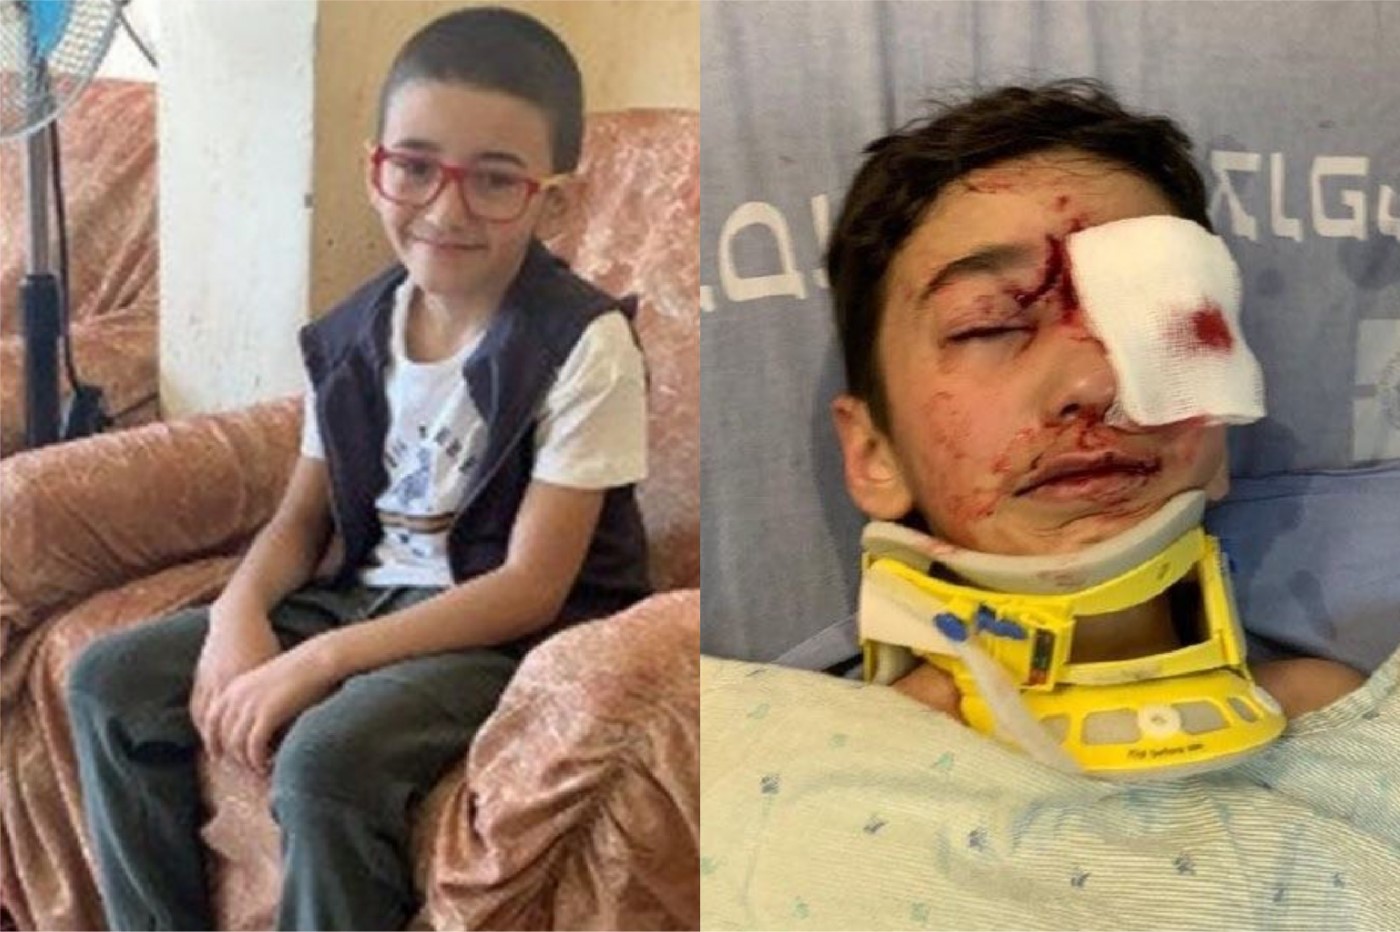 Malek Issa, 9-year-old resident of occupied al-Issawiya, before and after he was shot by Israeli police